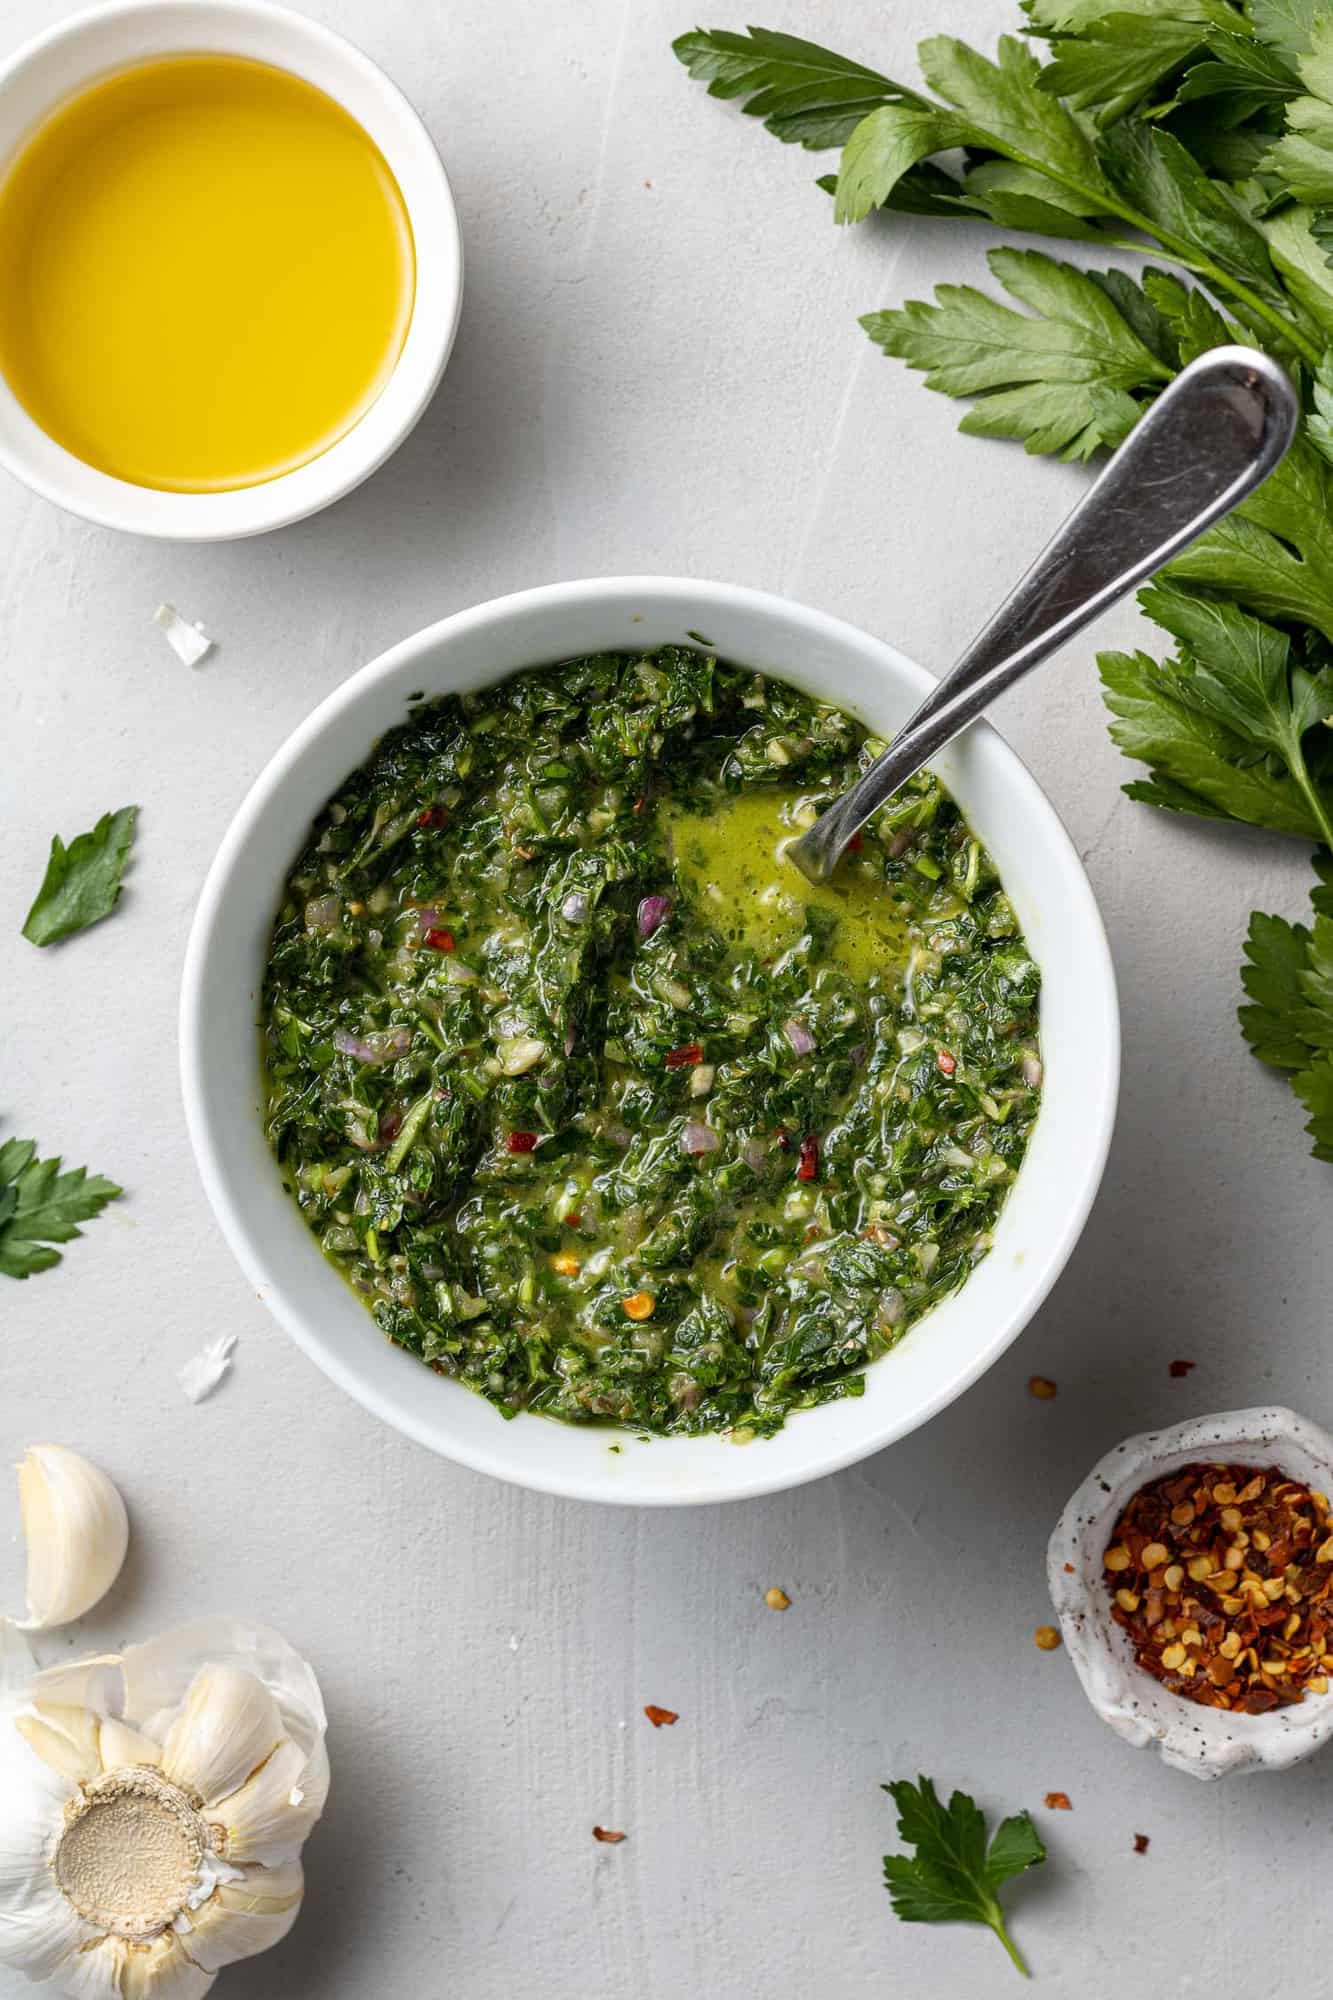 Overhead view of chimichurri sauce in a white bowl, surrounded by ingredients.